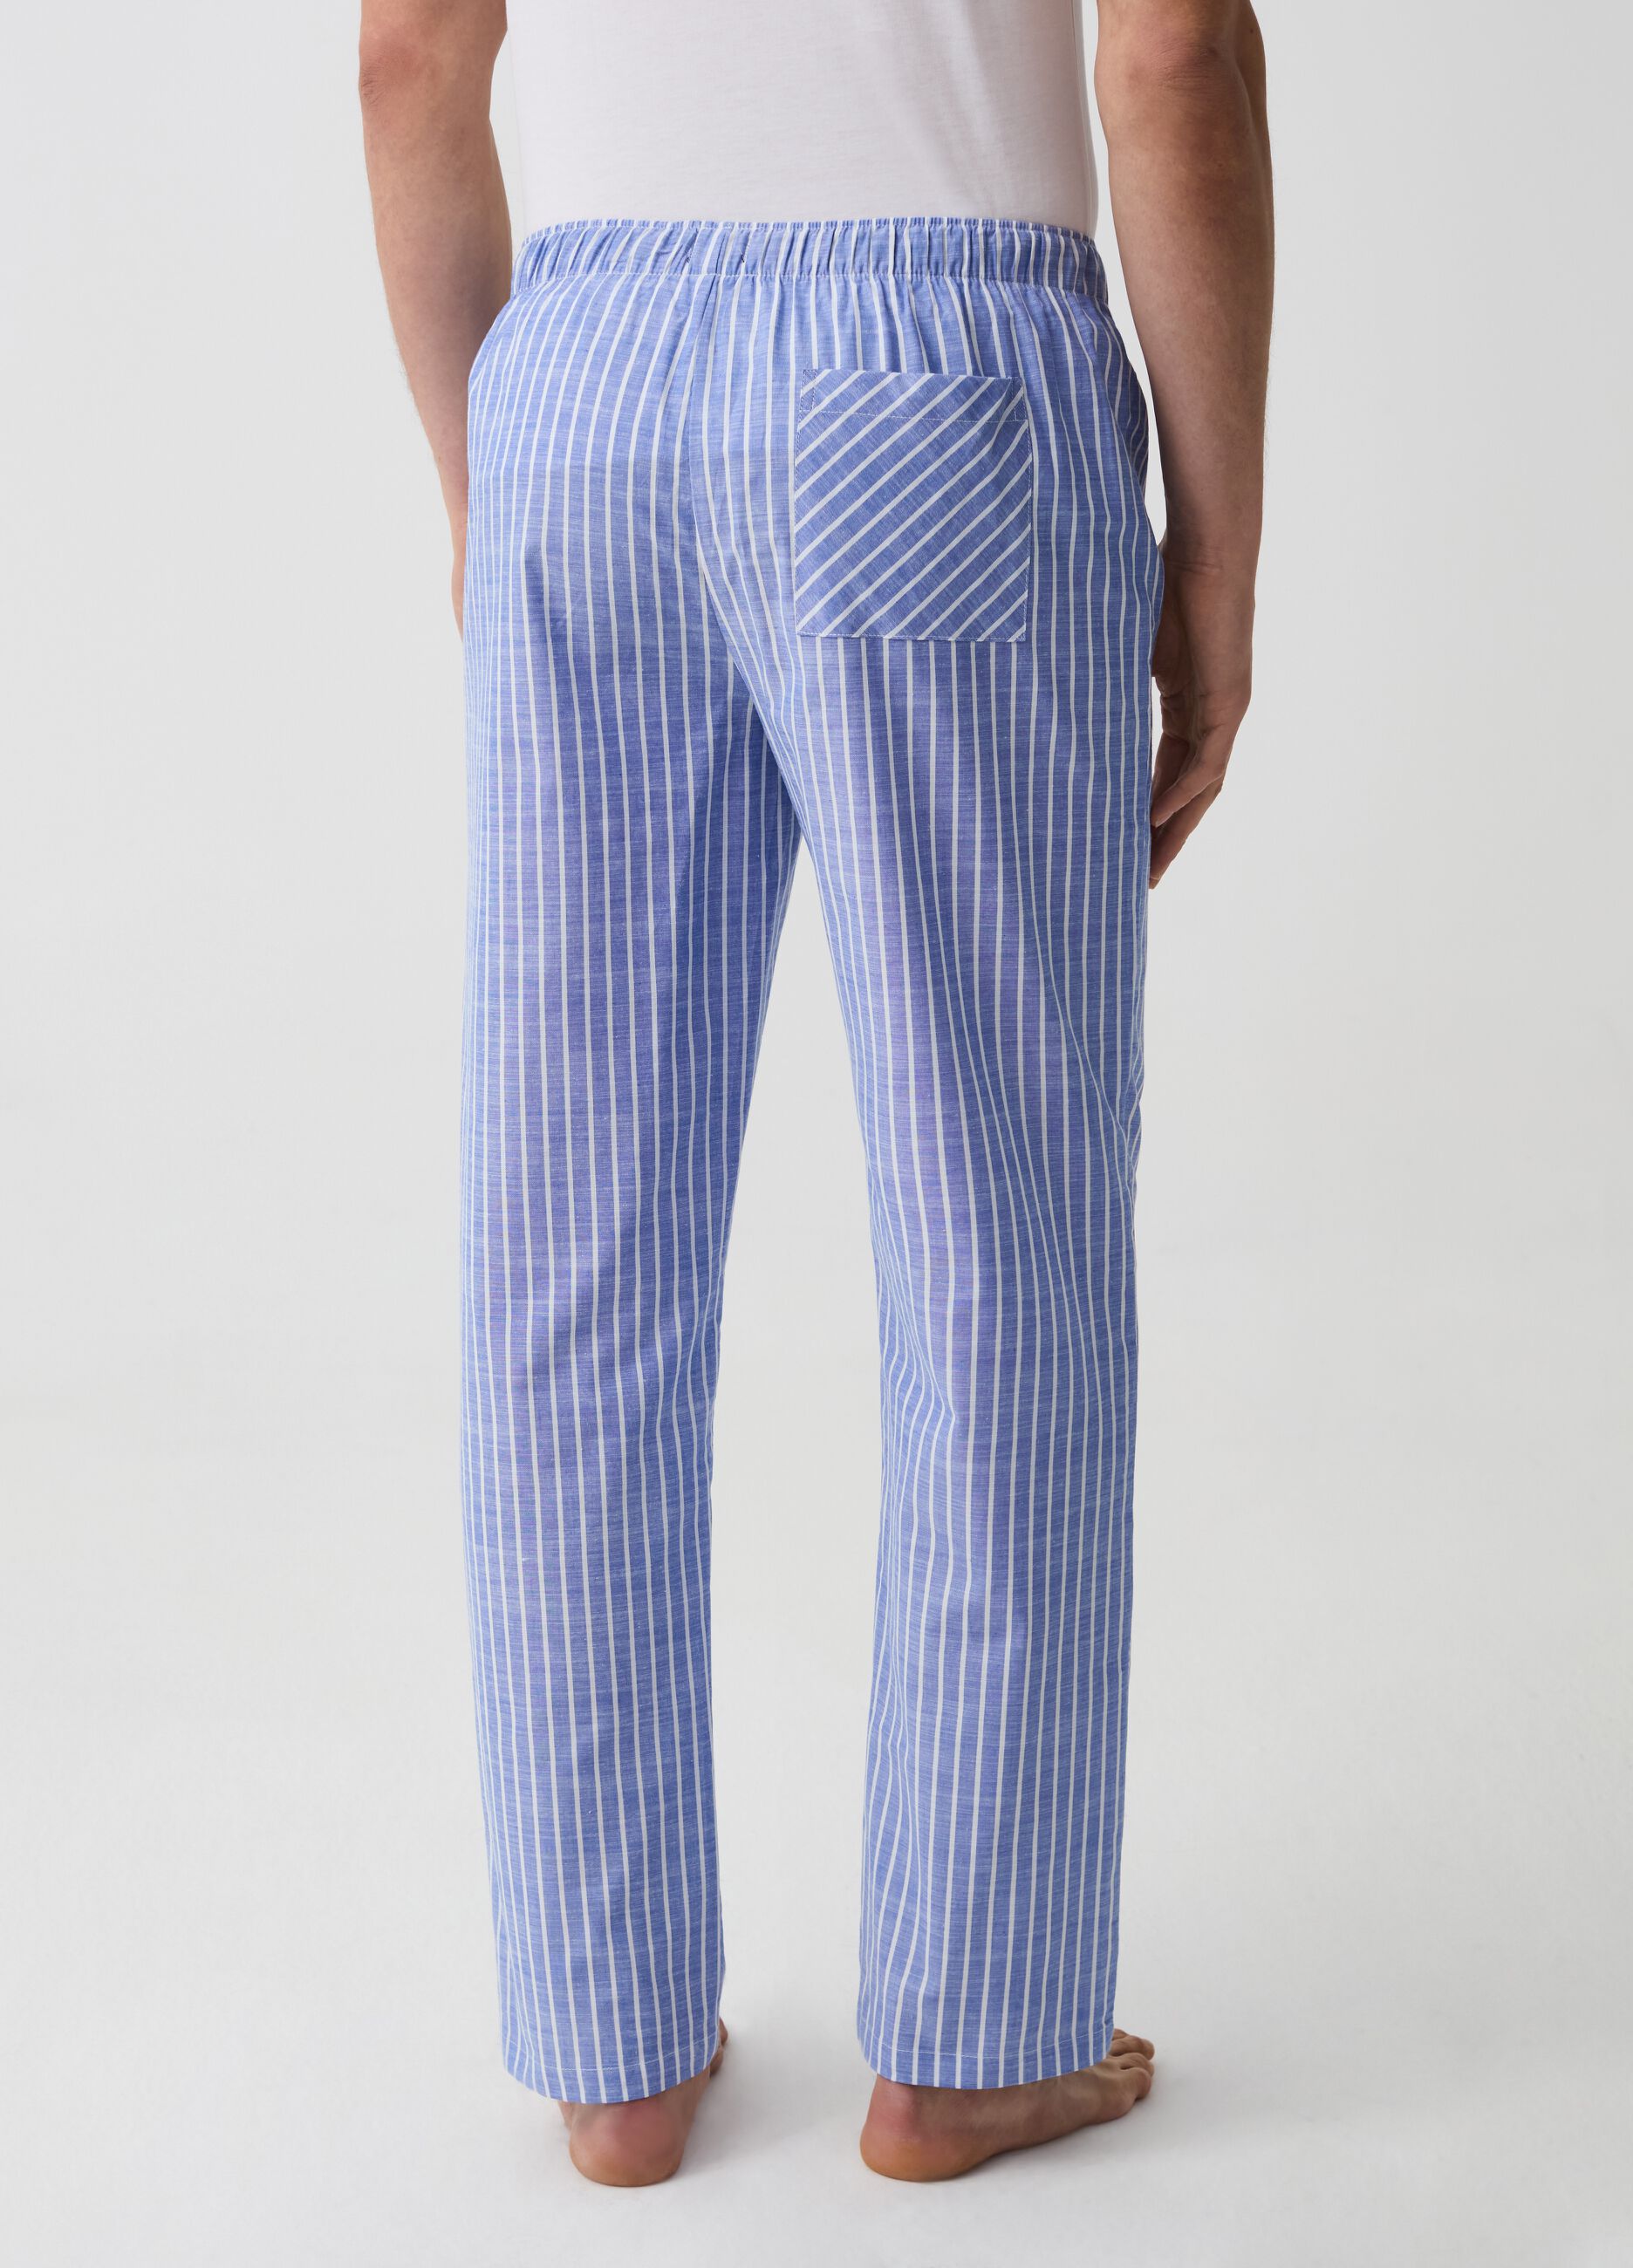 Pyjama trousers in patterned cotton